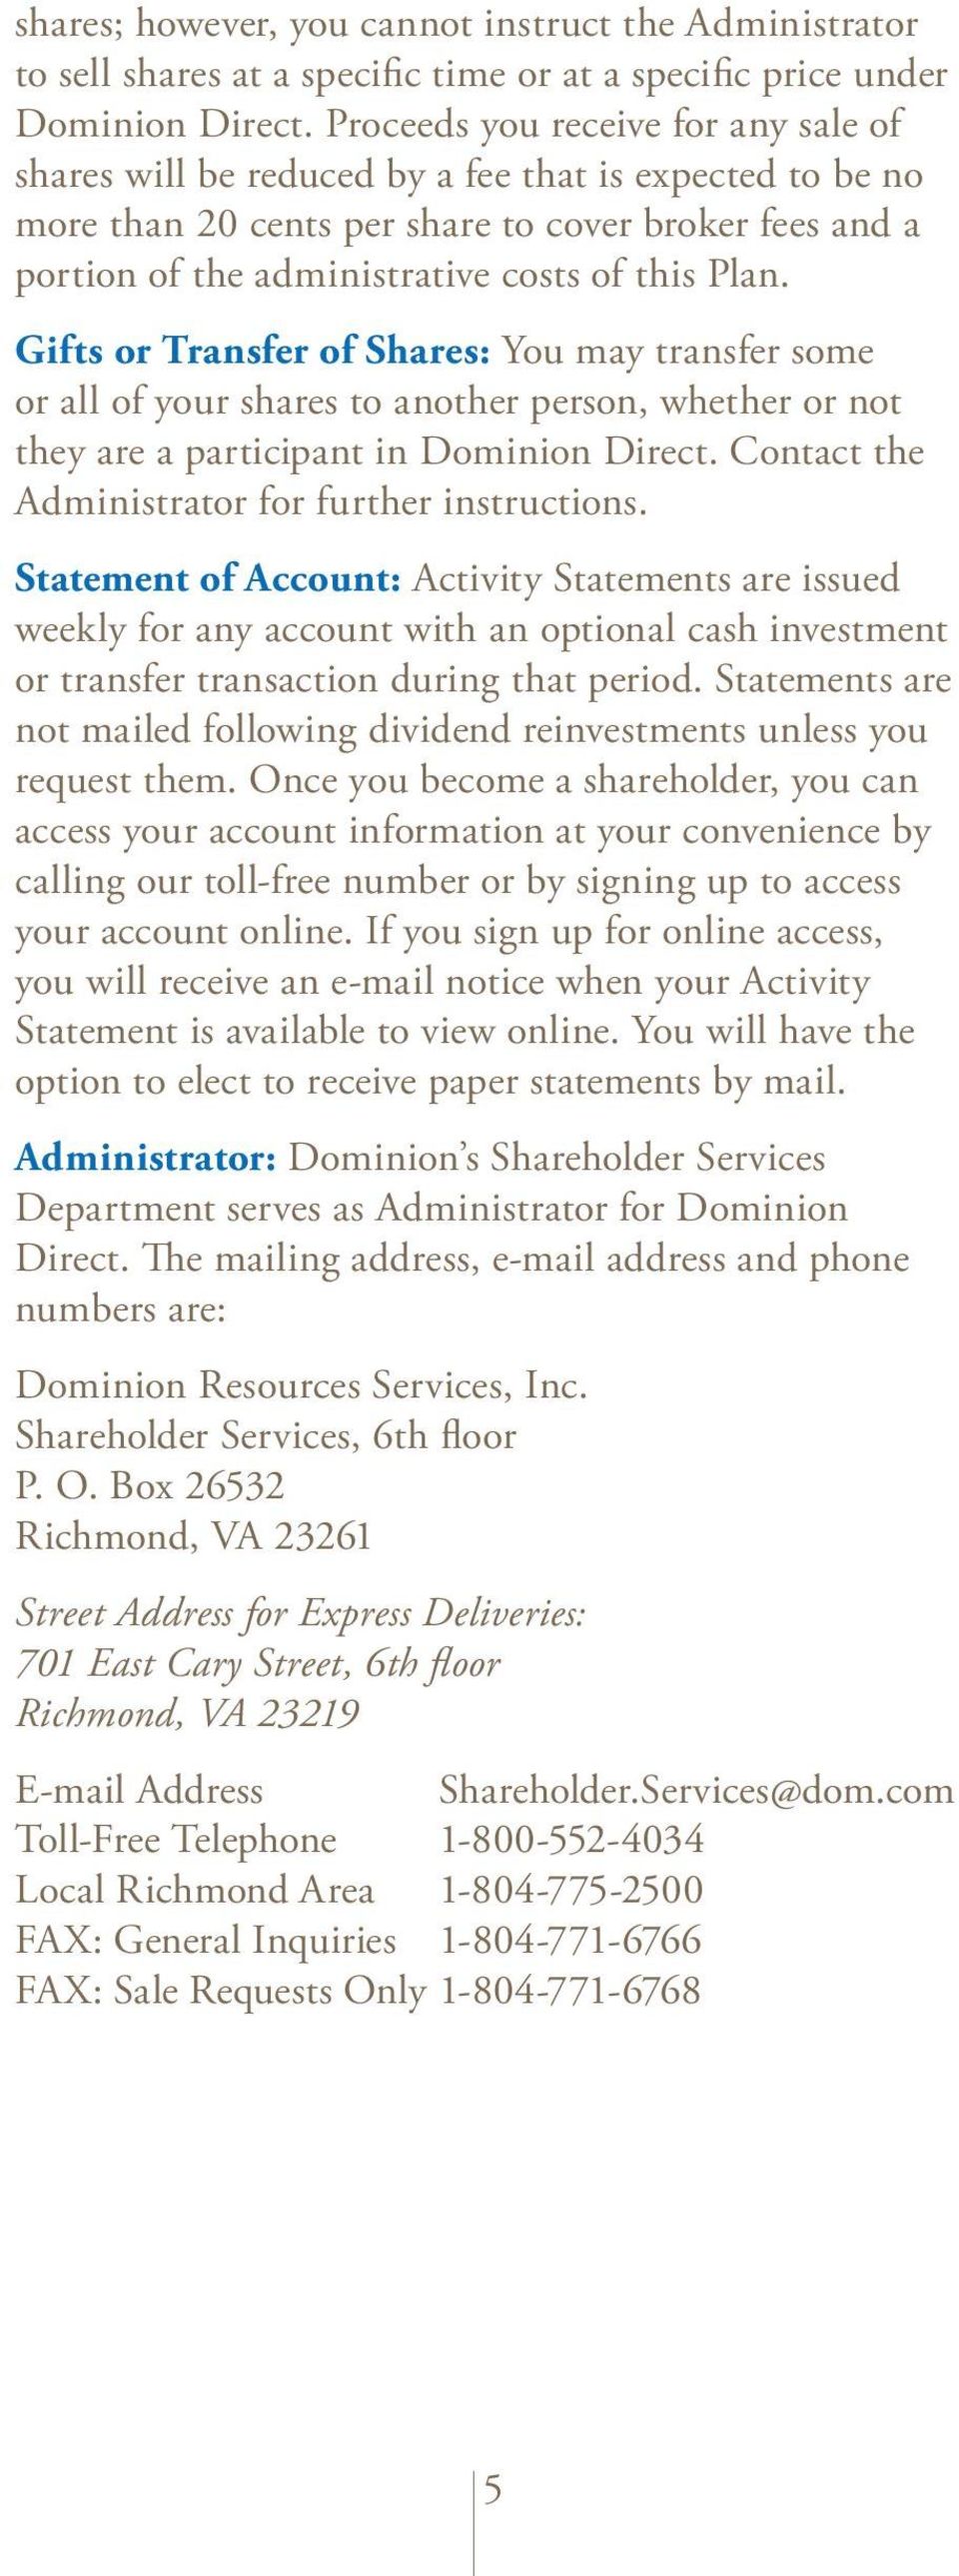 Gifts or Transfer of Shares: You may transfer some or all of your shares to another person, whether or not they are a participant in Dominion Direct.